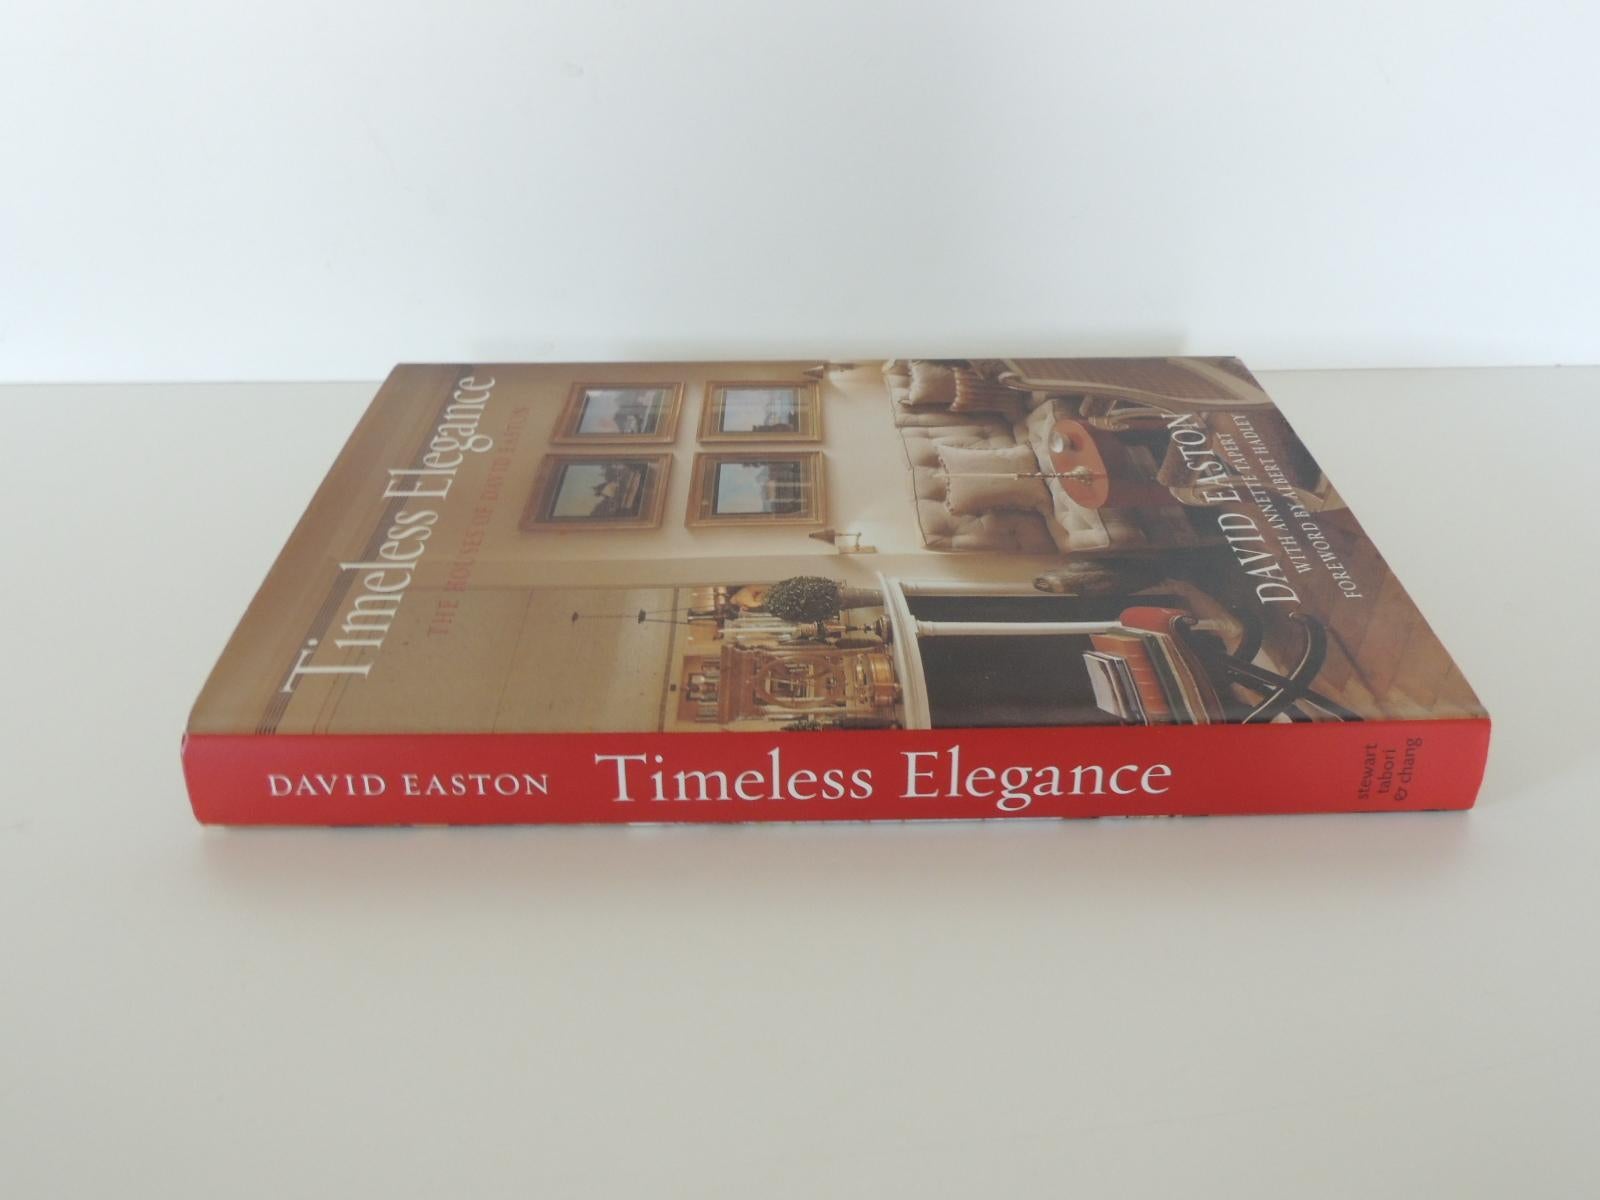 Timeless elegance the houses of David Easton decorative hard-cover book by David Easton, Stewart, Tabori & Chang, New York, 2010
In this rare examination of the work of one of America’s preeminent interior designers and architects, David Easton, we